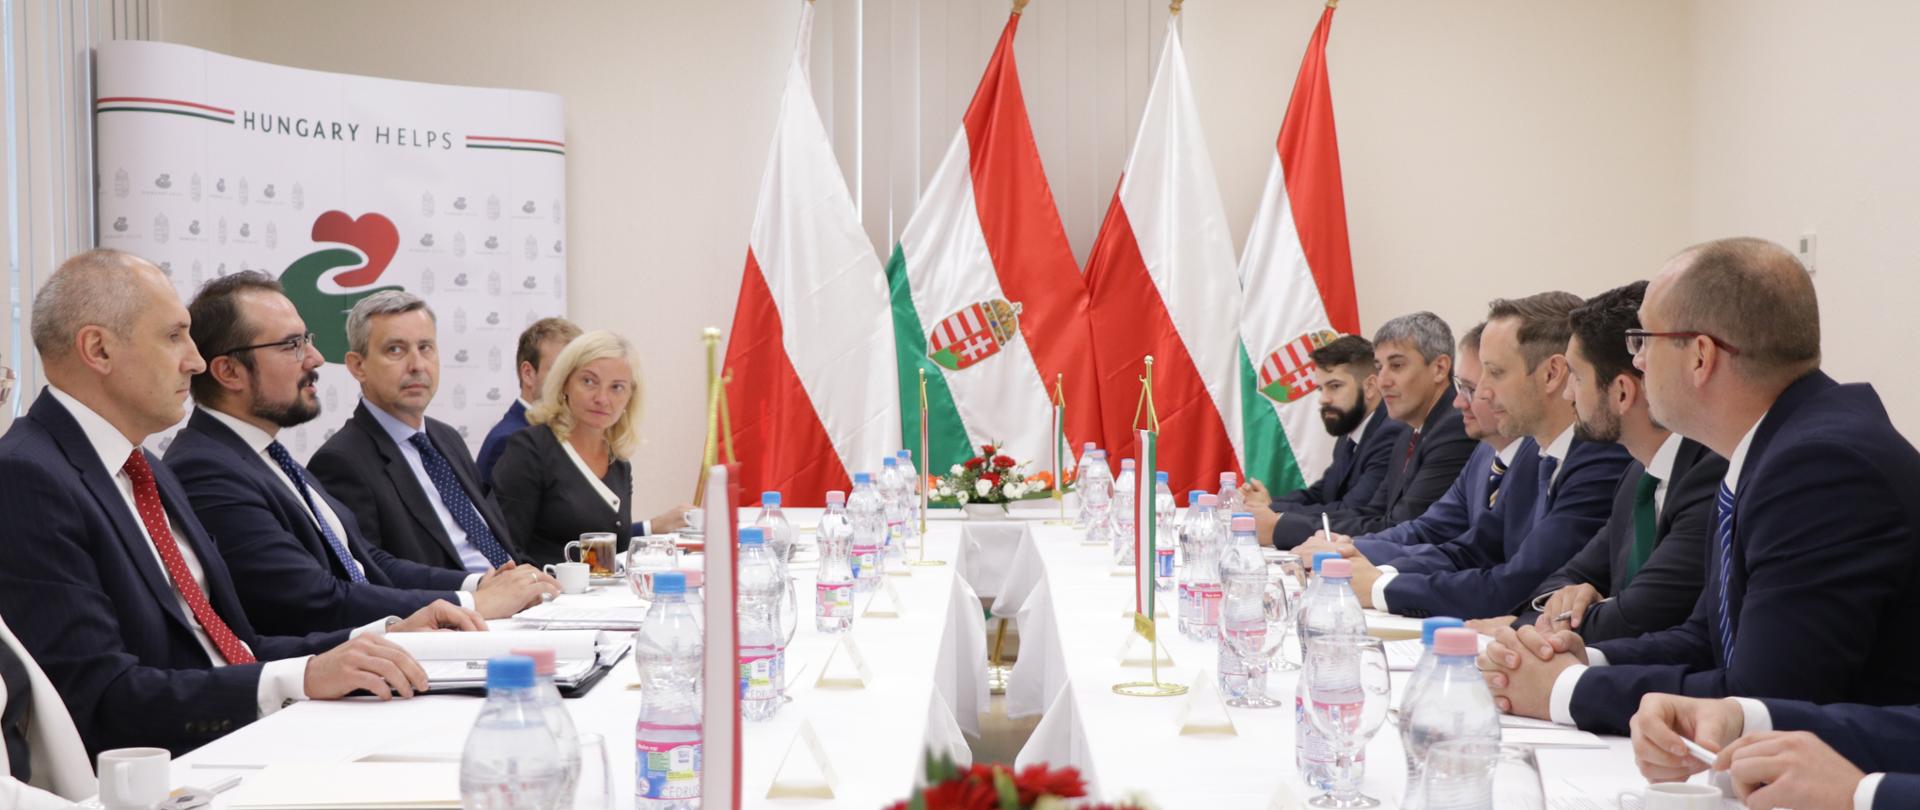 Group of people are sitting at the table. On the background there are Polish and Hungarian flags